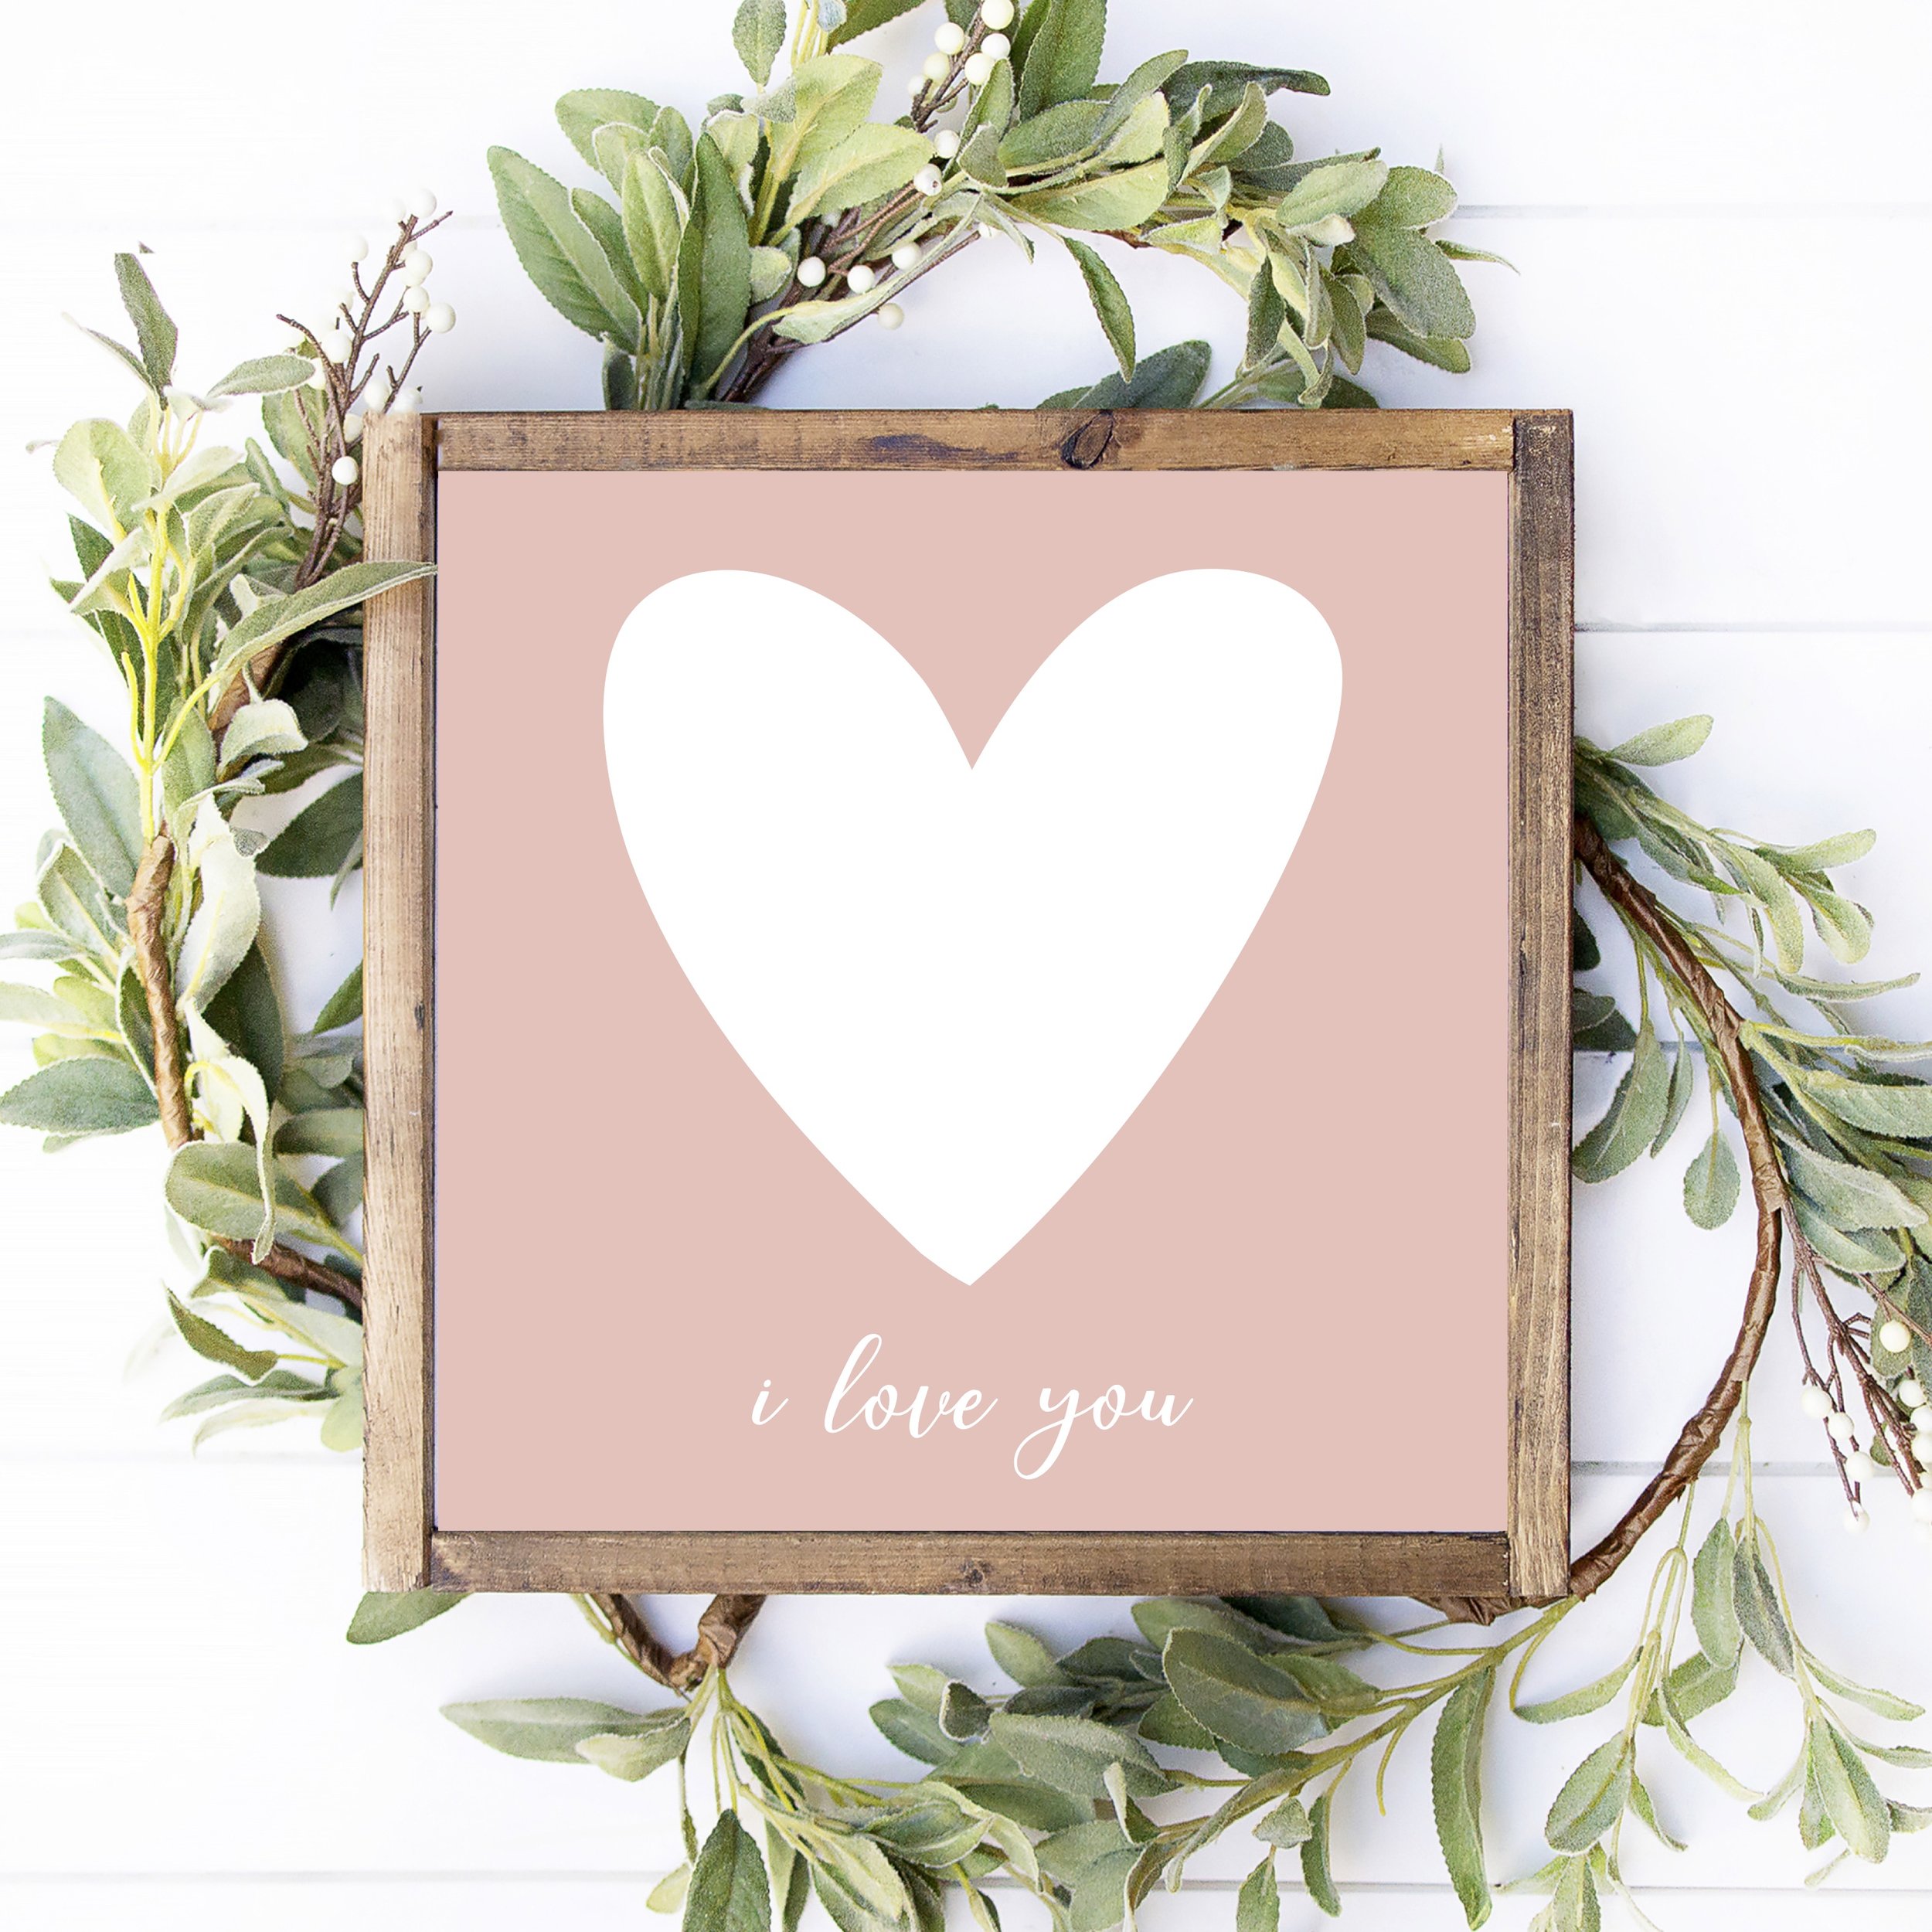 12x12 i live you with heart framed sign valentines Day wood sign diy kit Canada kelowna.jpg